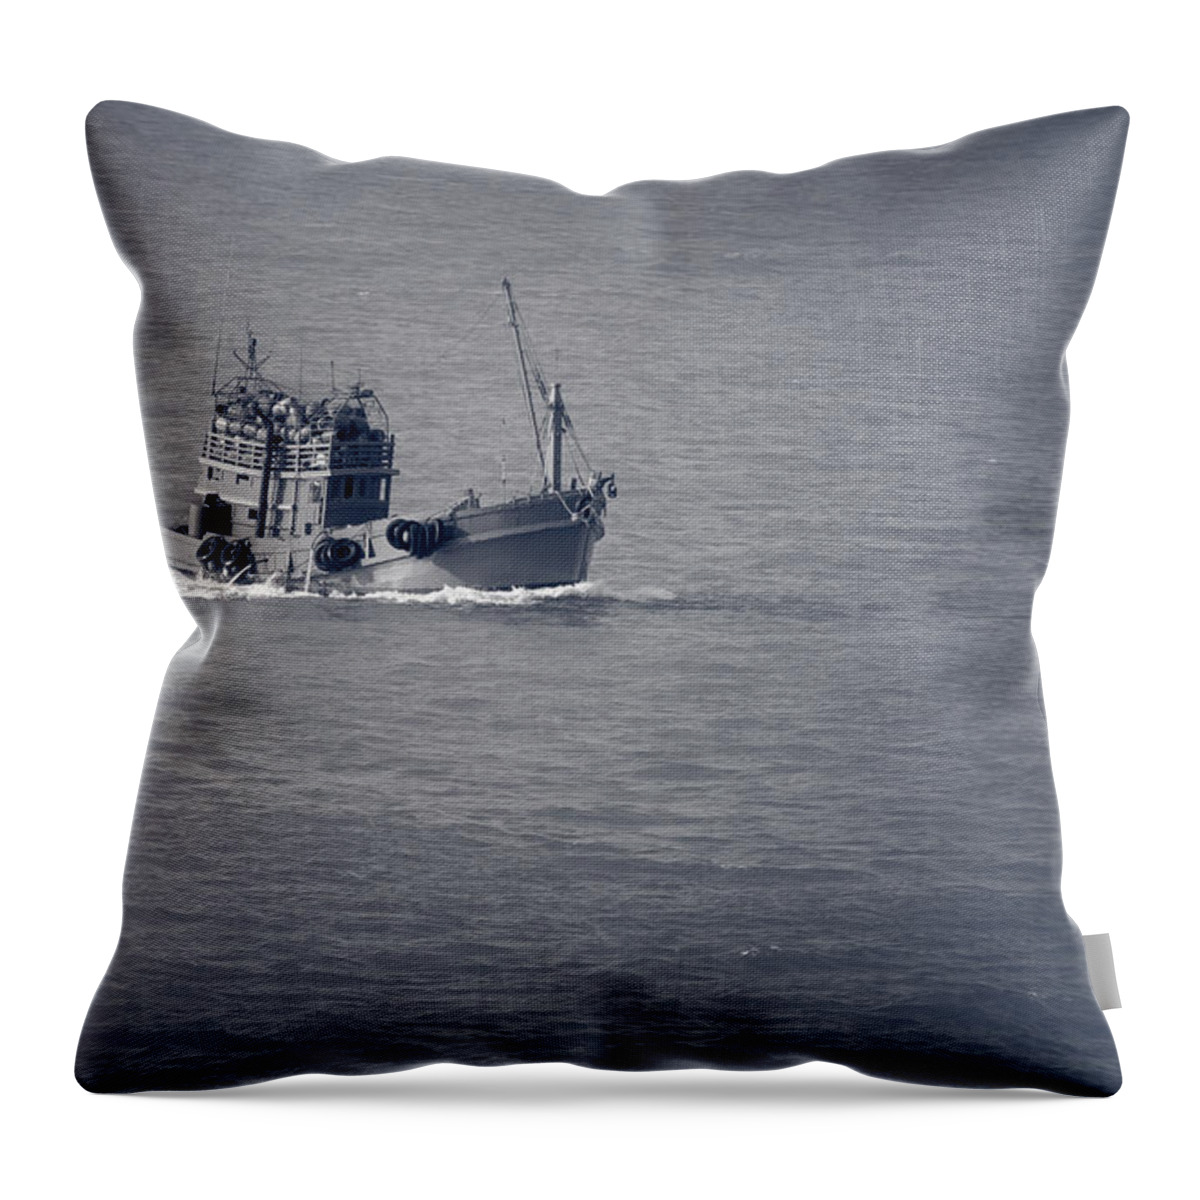 Cruise Throw Pillow featuring the photograph Fishing Vessel by Ray Shiu